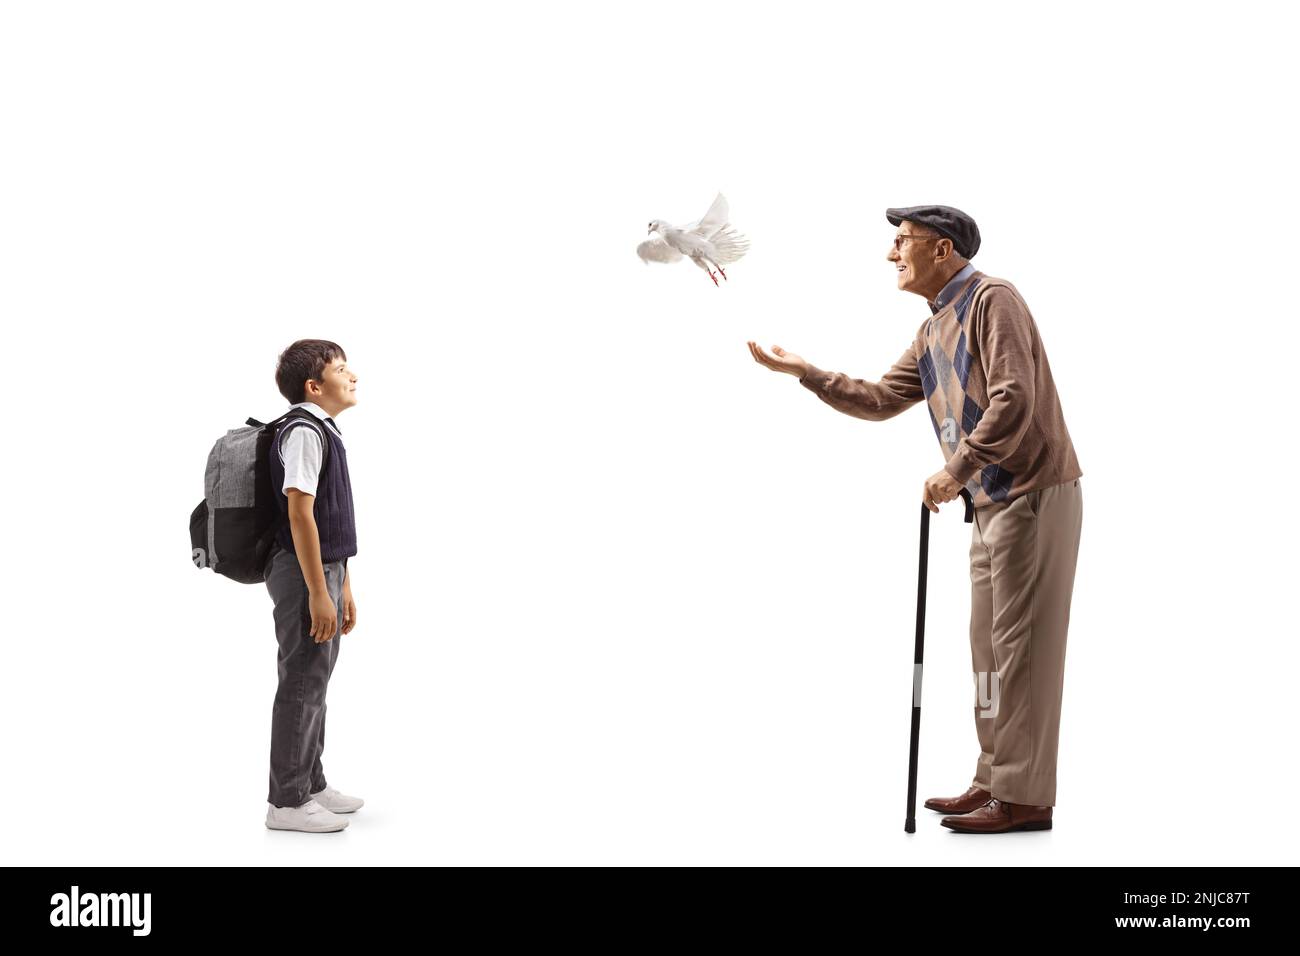 Full length profile shot of a schoolboy watching an elderly man letting a dove fly isolated on white background Stock Photo